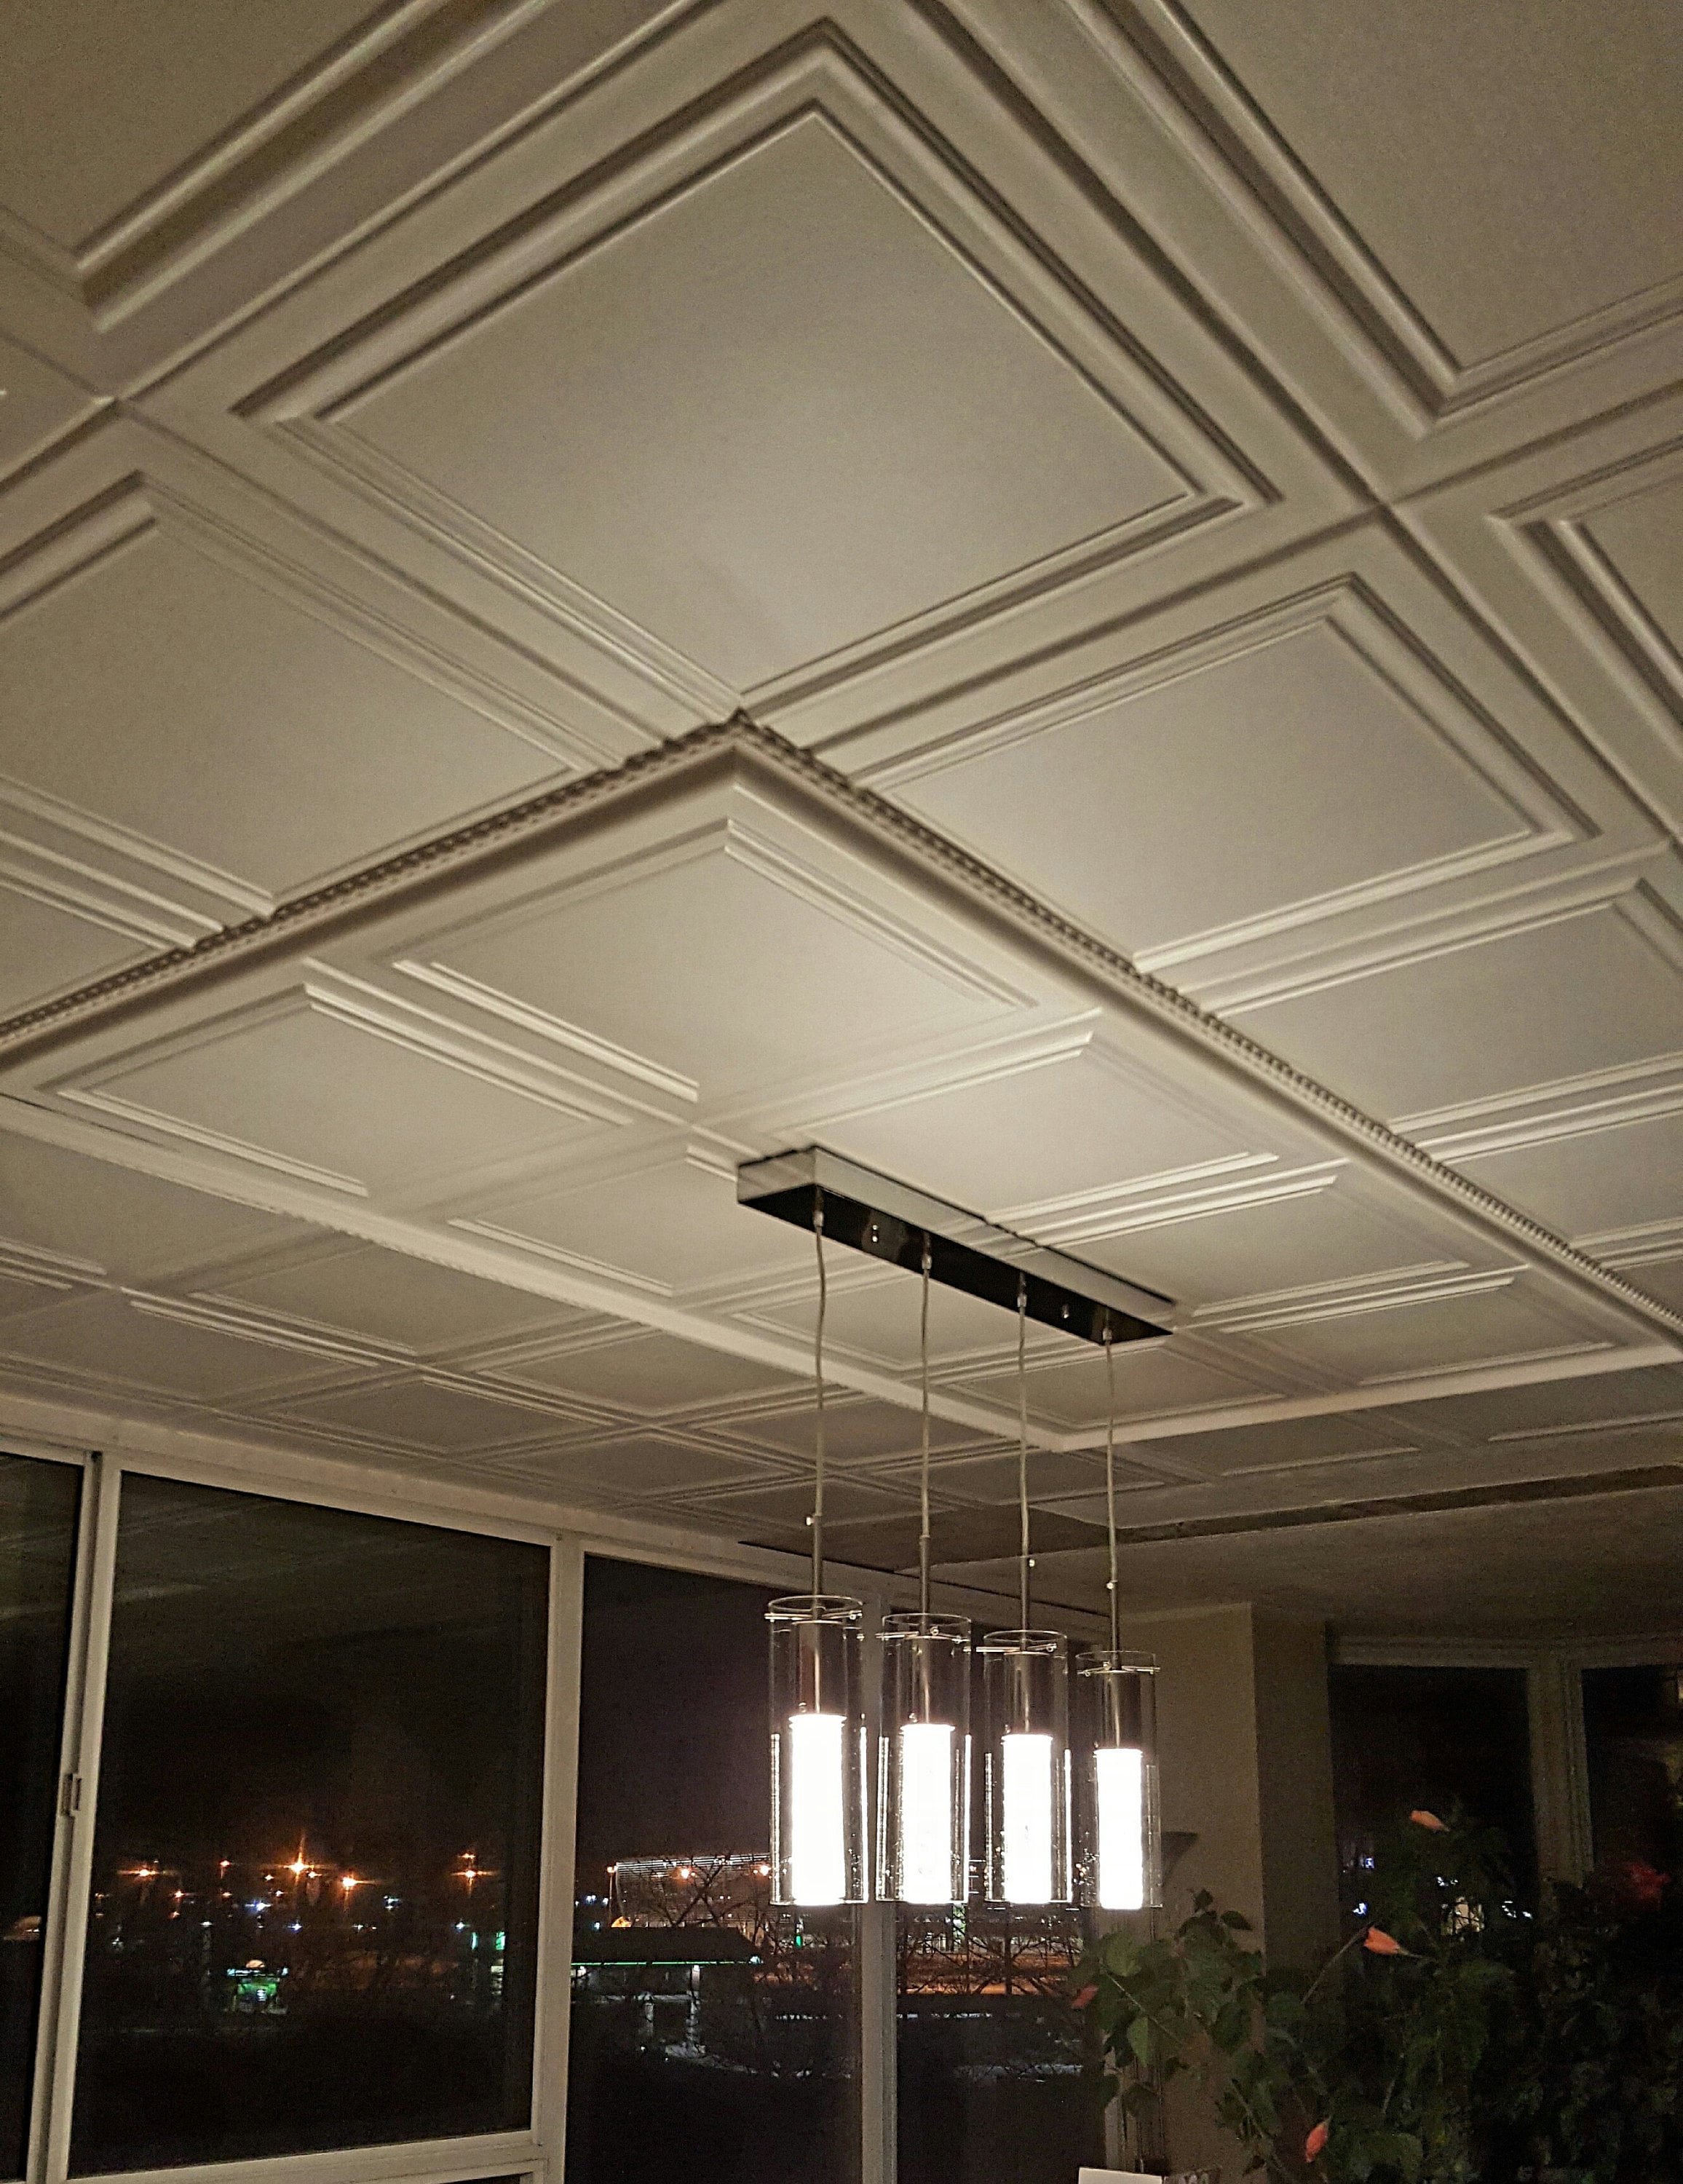 Styrofoam Ceiling Tiles Popcorn, How To Cover A Popcorn Ceiling With Tiles